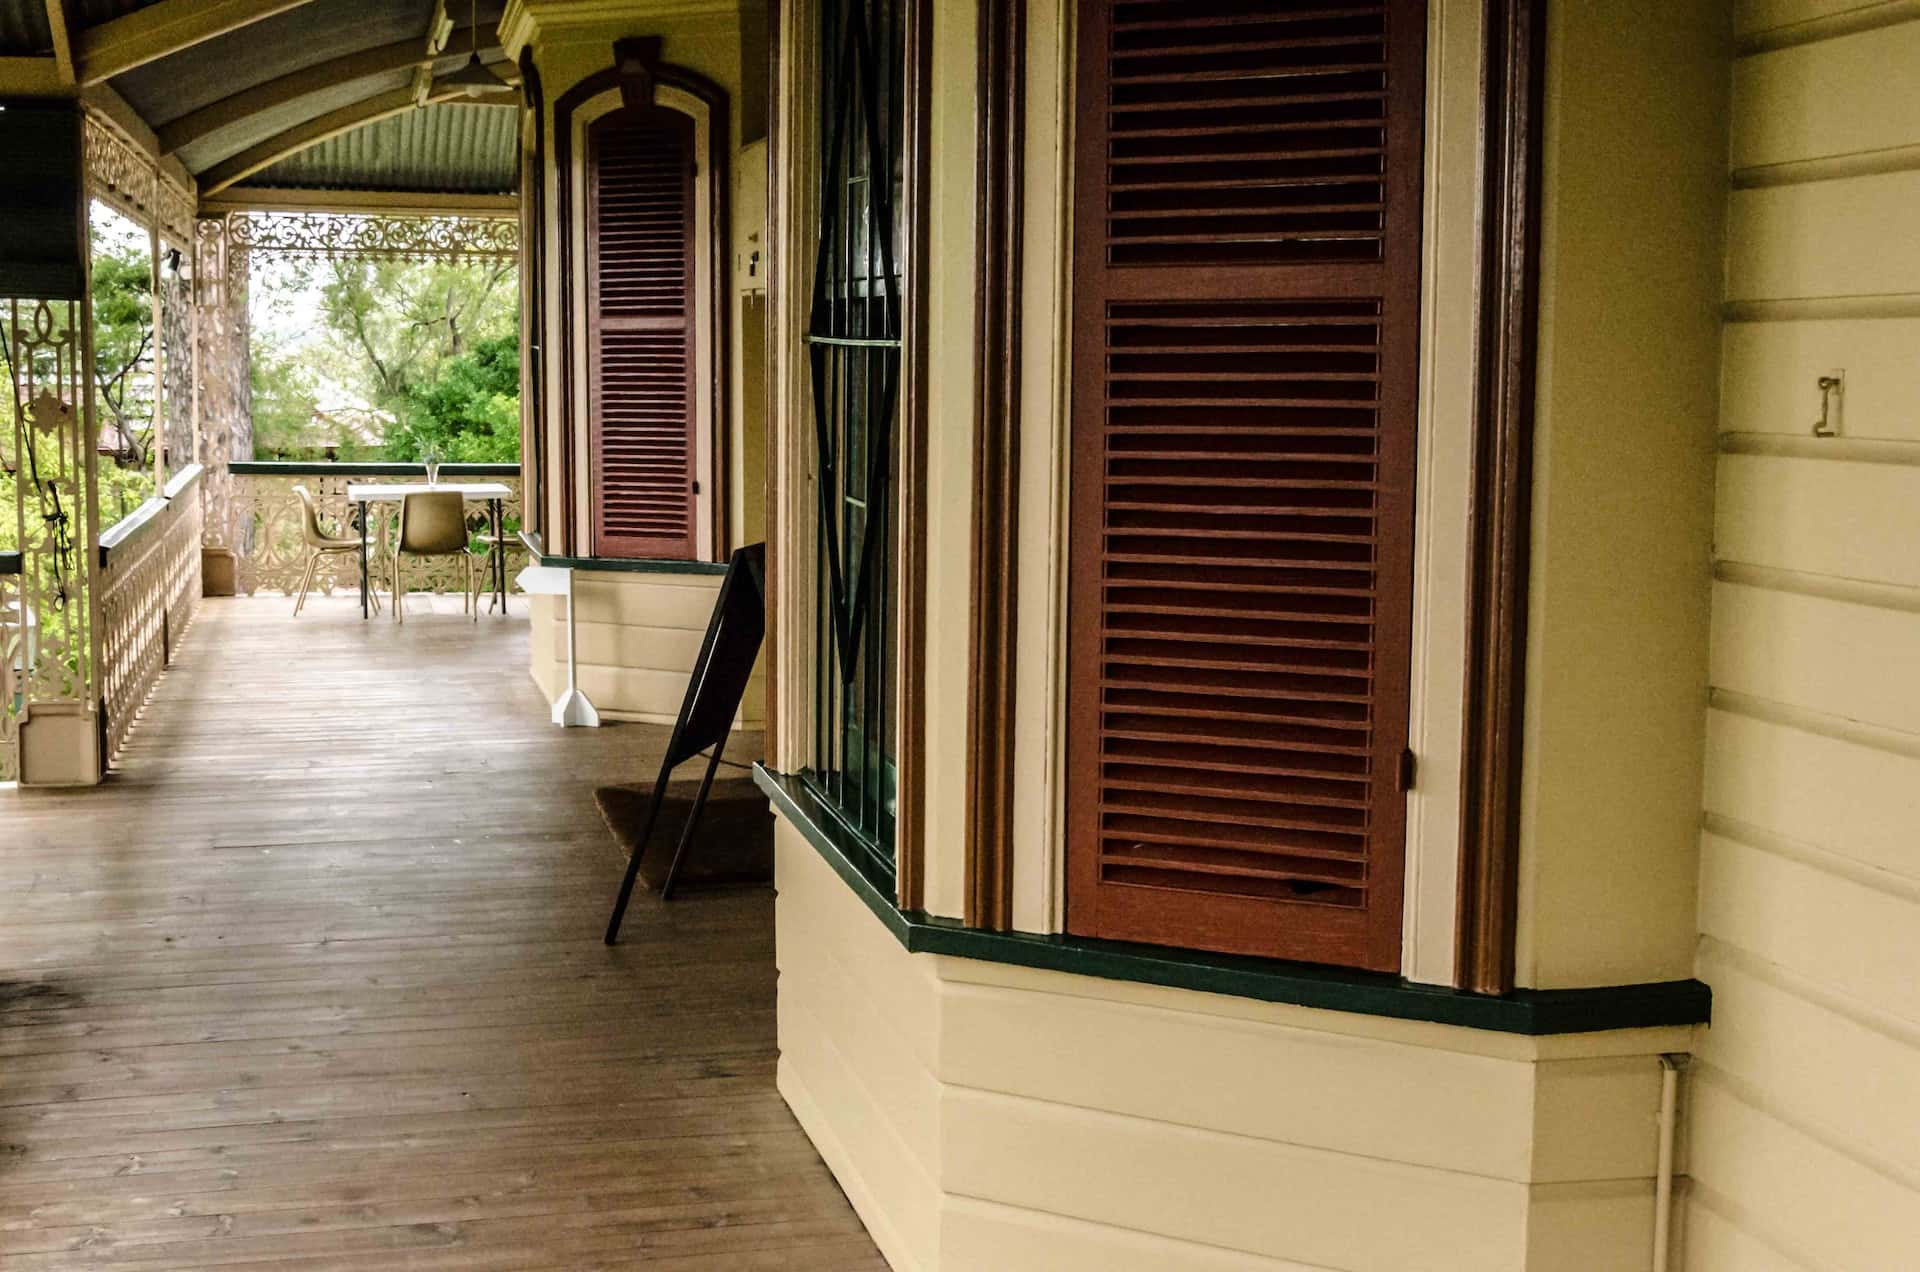 What Is a Veranda and What Is It Used For?